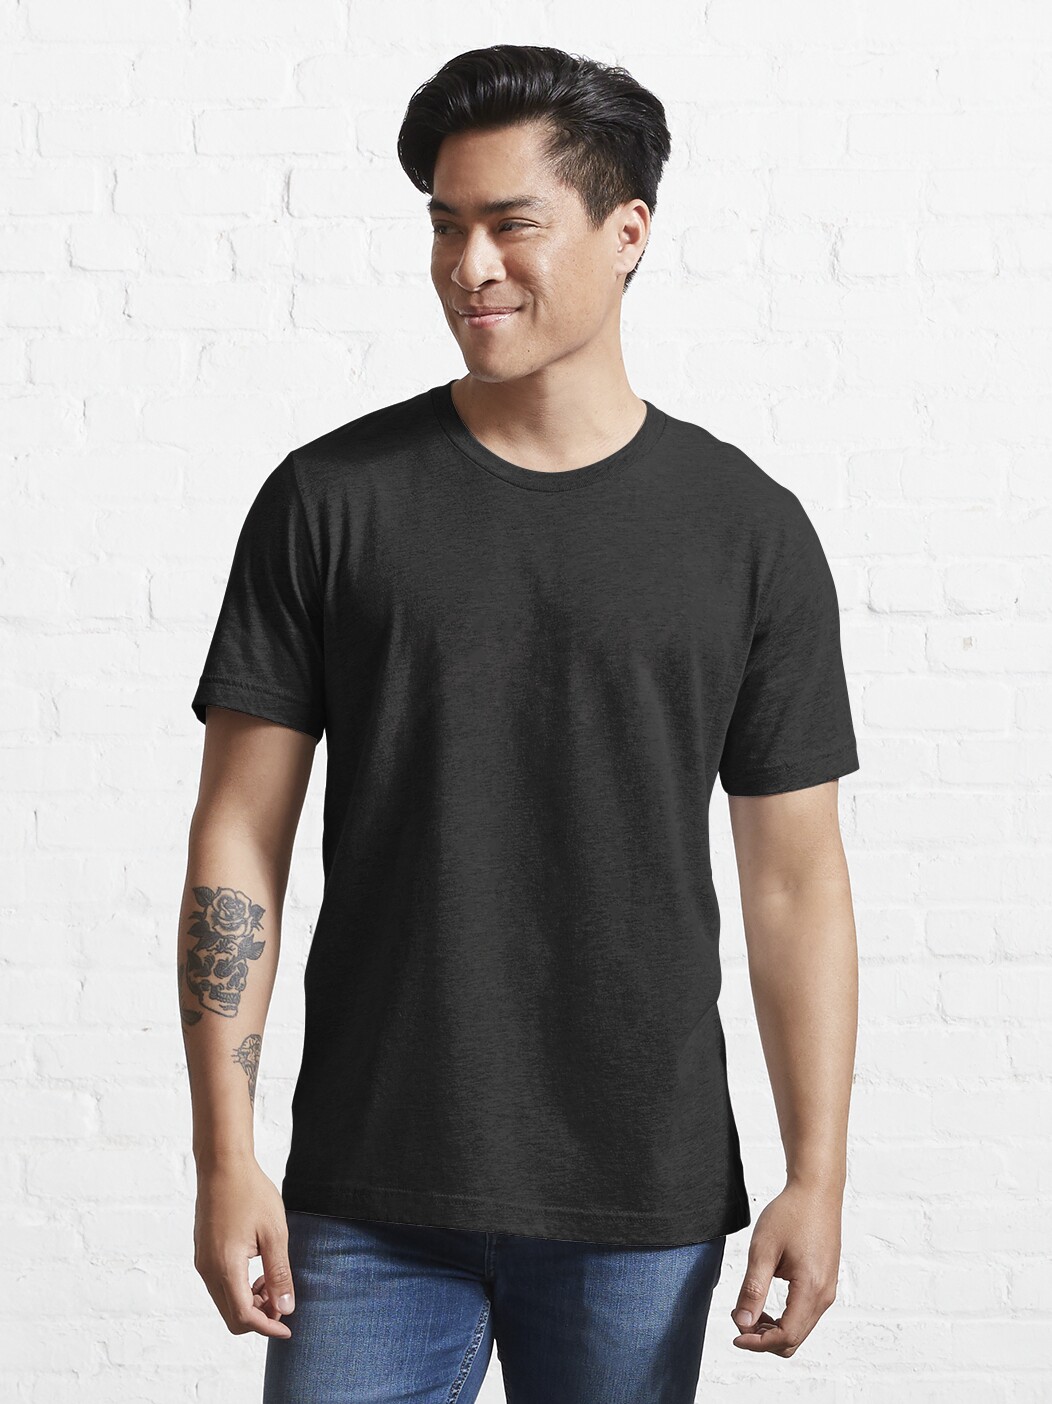 ssrcoslim fit t shirtmens10101001c5ca27c6fronttall three quarter2000x2000 6 - Sam And Colby Shop